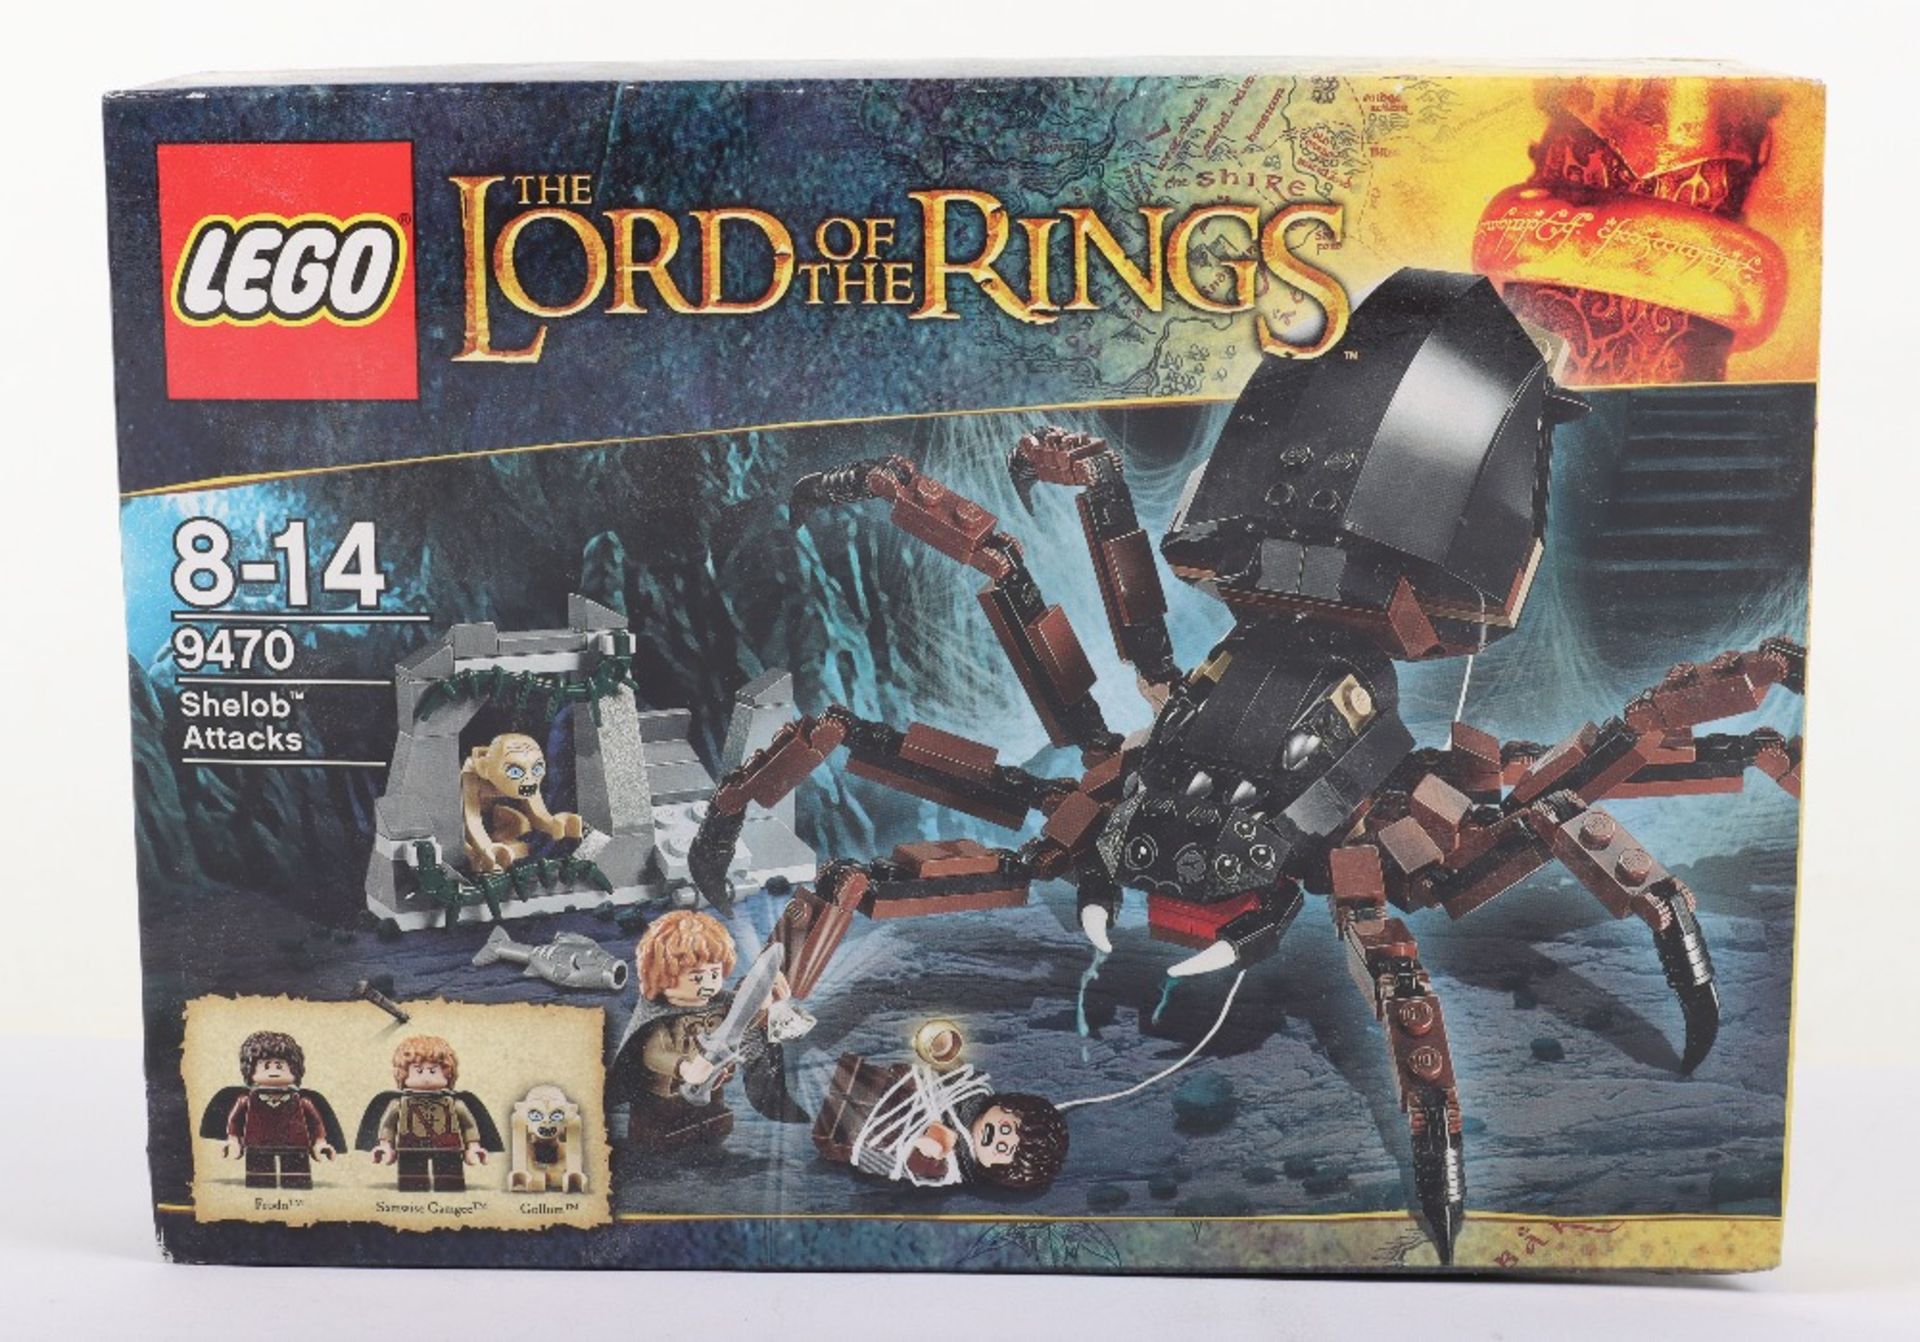 Lego Lord of the rings 9470 shelob attacks sealed boxed